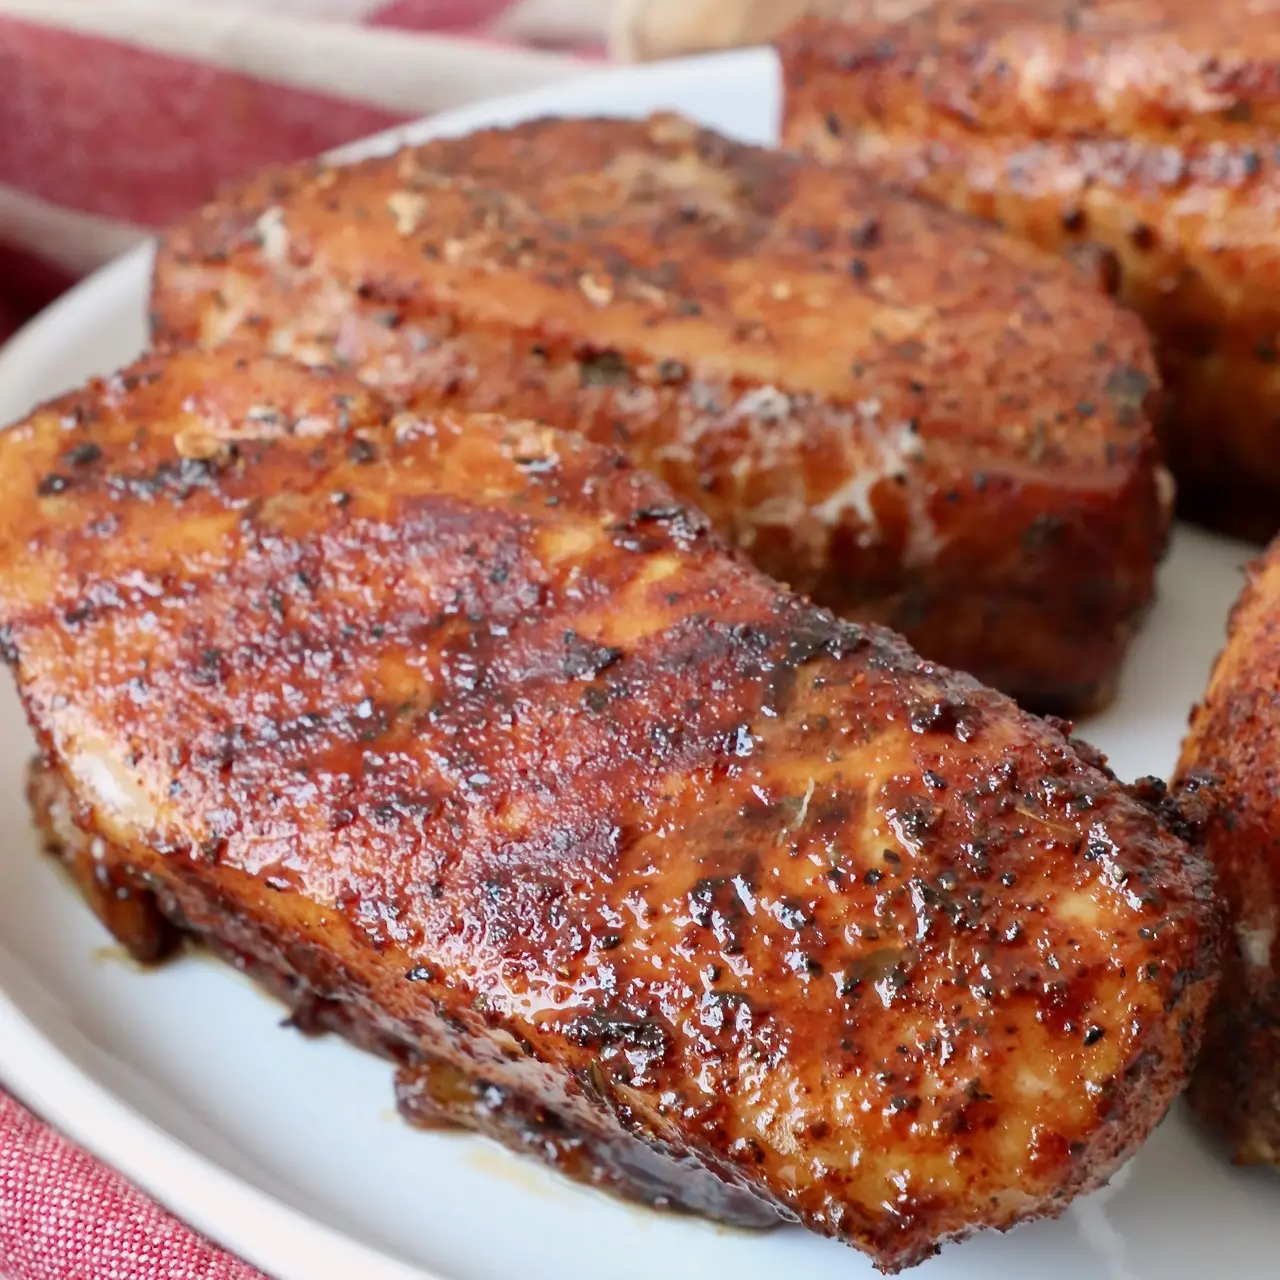 how do you cook smoked pork chops - Can you cook smoked pork chops in the microwave